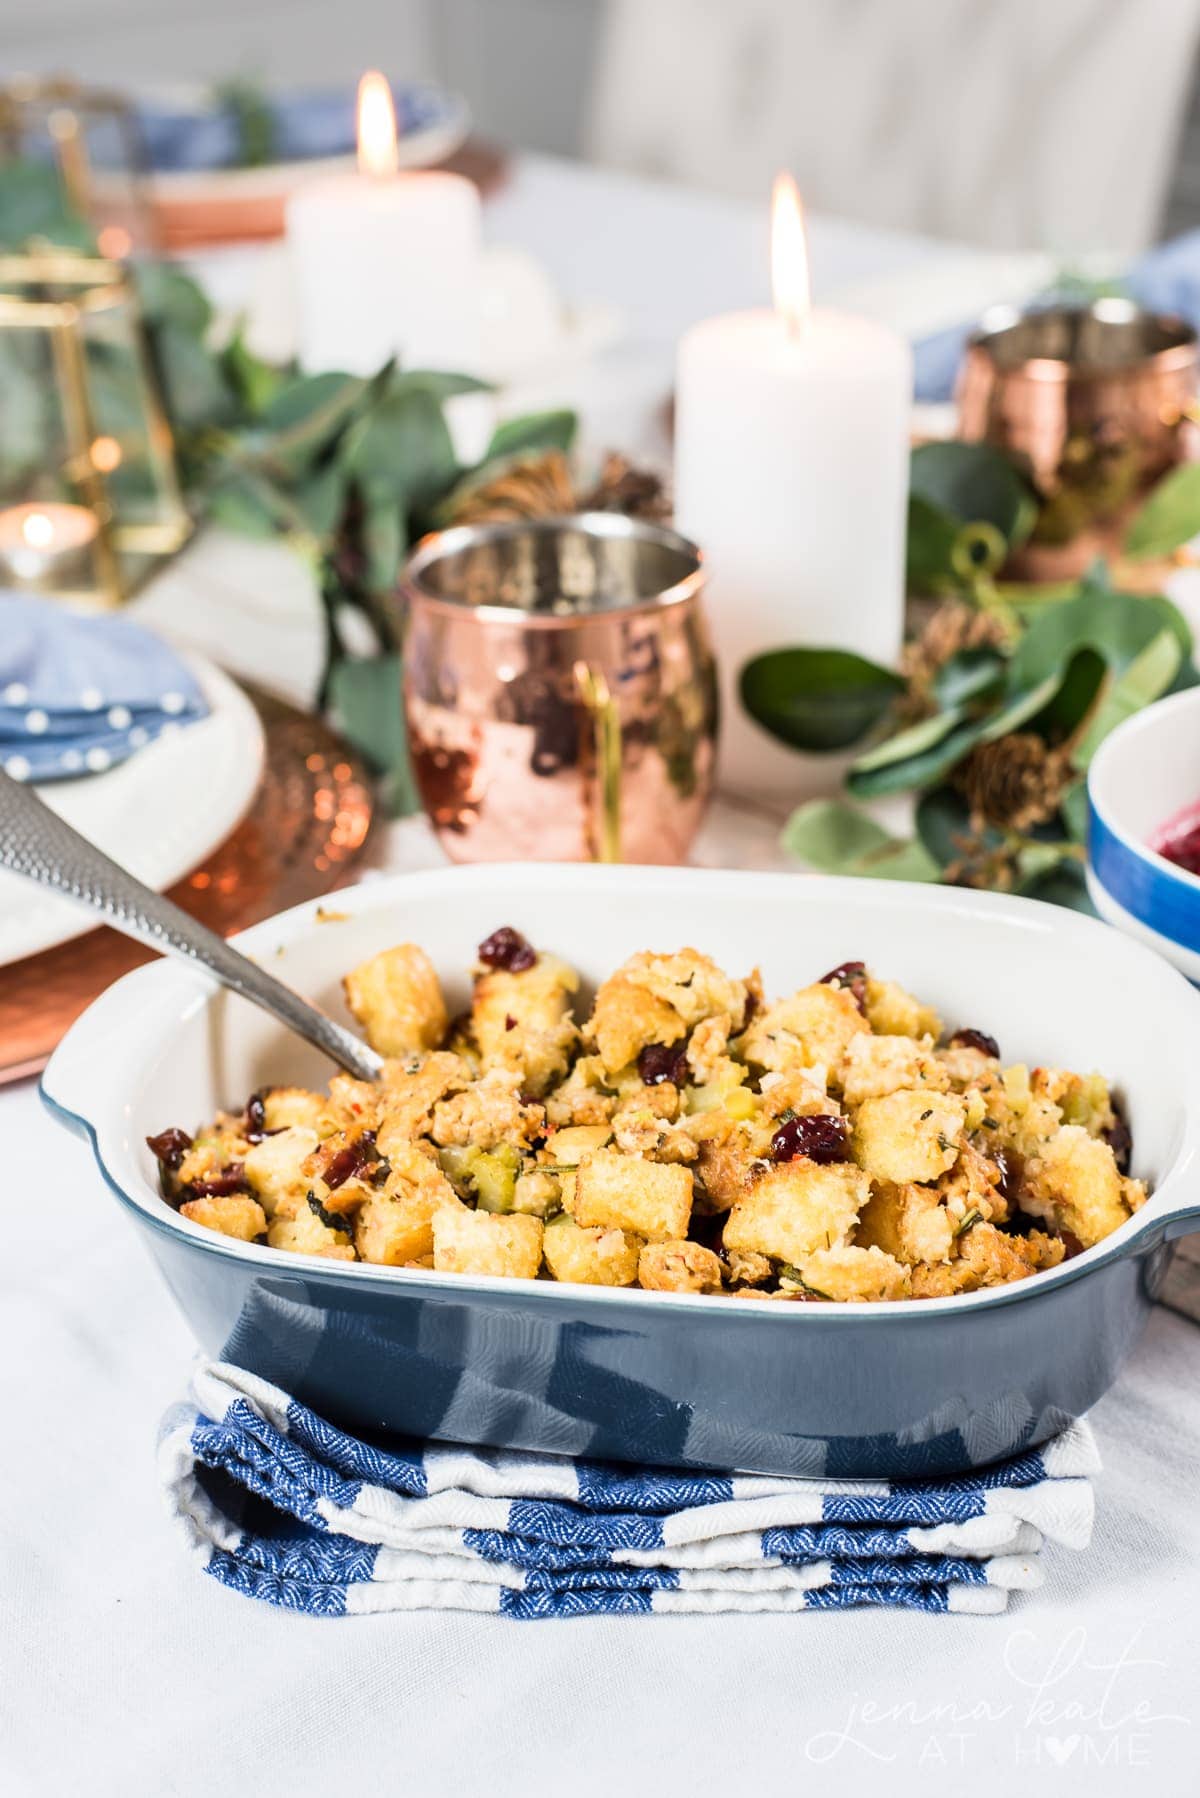 My Favorite Tried & Tested Turkey Stuffing Recipe